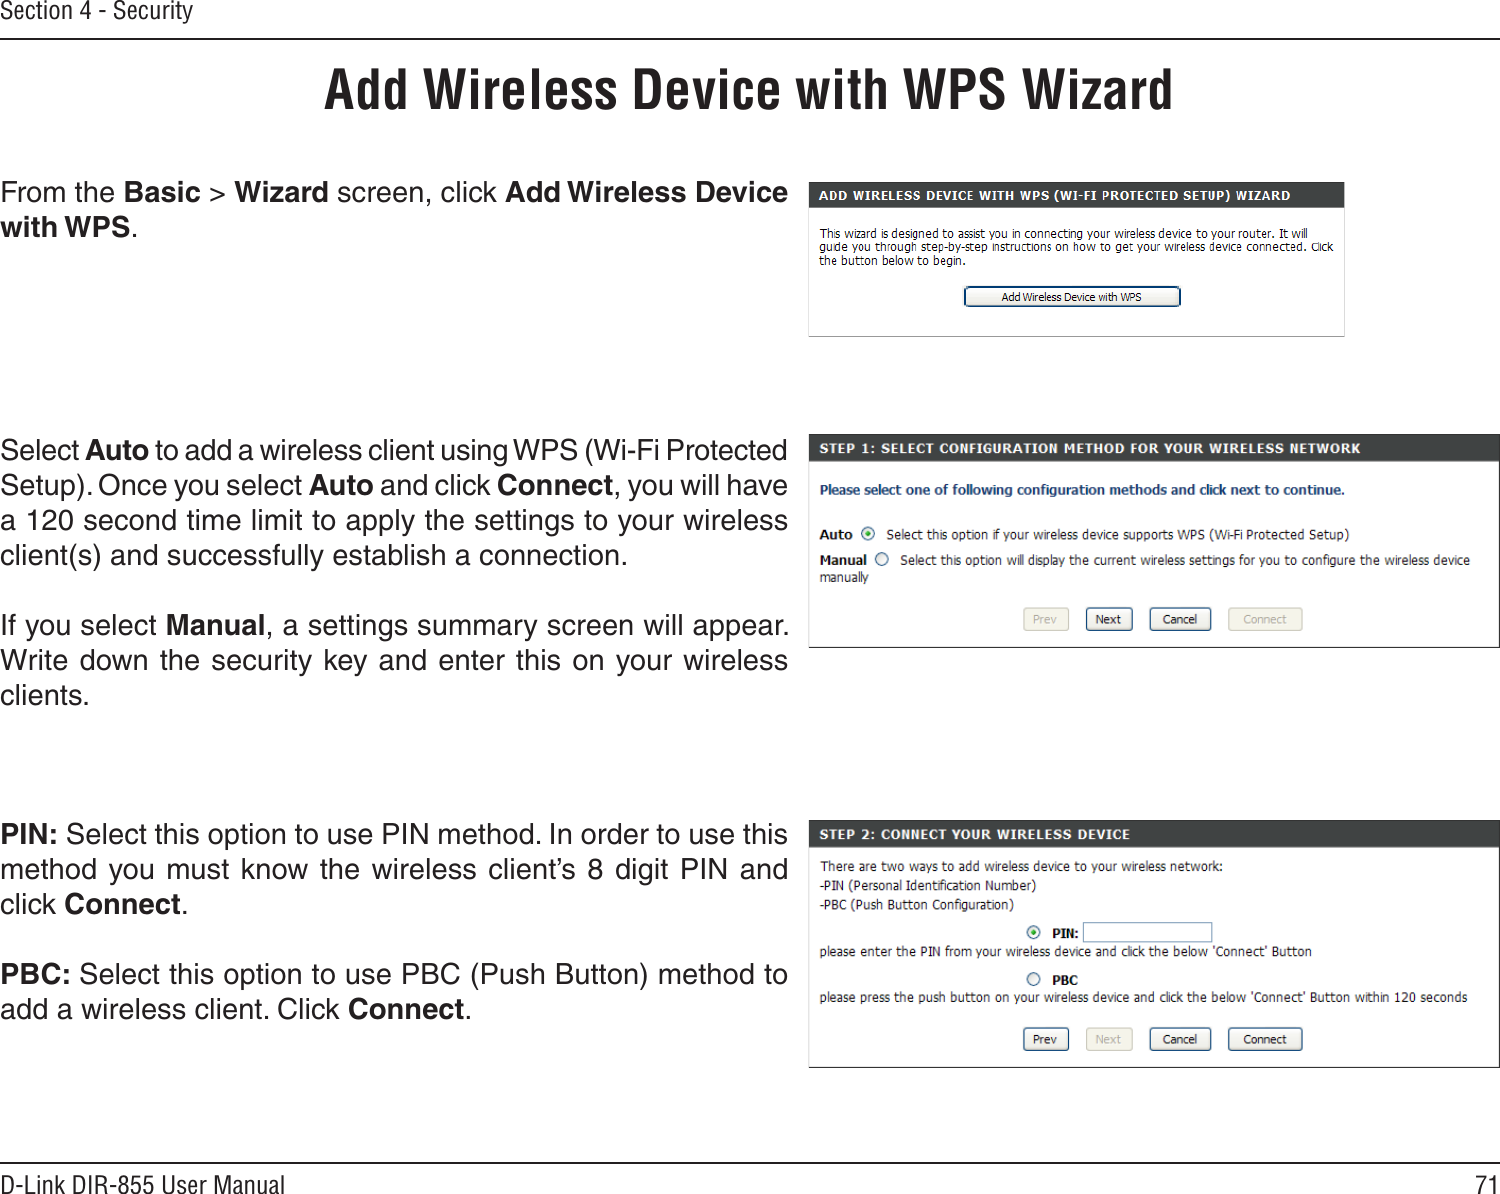 71D-Link DIR-855 User ManualSection 4 - SecurityFrom the Basic &gt; Wizard screen, click Add Wireless Device with WPS.Add Wireless Device with WPS WizardPIN: Select this option to use PIN method. In order to use this method you must know the wireless client’s  8  digit  PIN  and click Connect.PBC: Select this option to use PBC (Push Button) method to add a wireless client. Click Connect.Select Auto to add a wireless client using WPS (Wi-Fi Protected Setup). Once you select Auto and click Connect, you will have a 120 second time limit to apply the settings to your wireless client(s) and successfully establish a connection. If you select Manual, a settings summary screen will appear. Write down the security key and enter this on your wireless clients. 